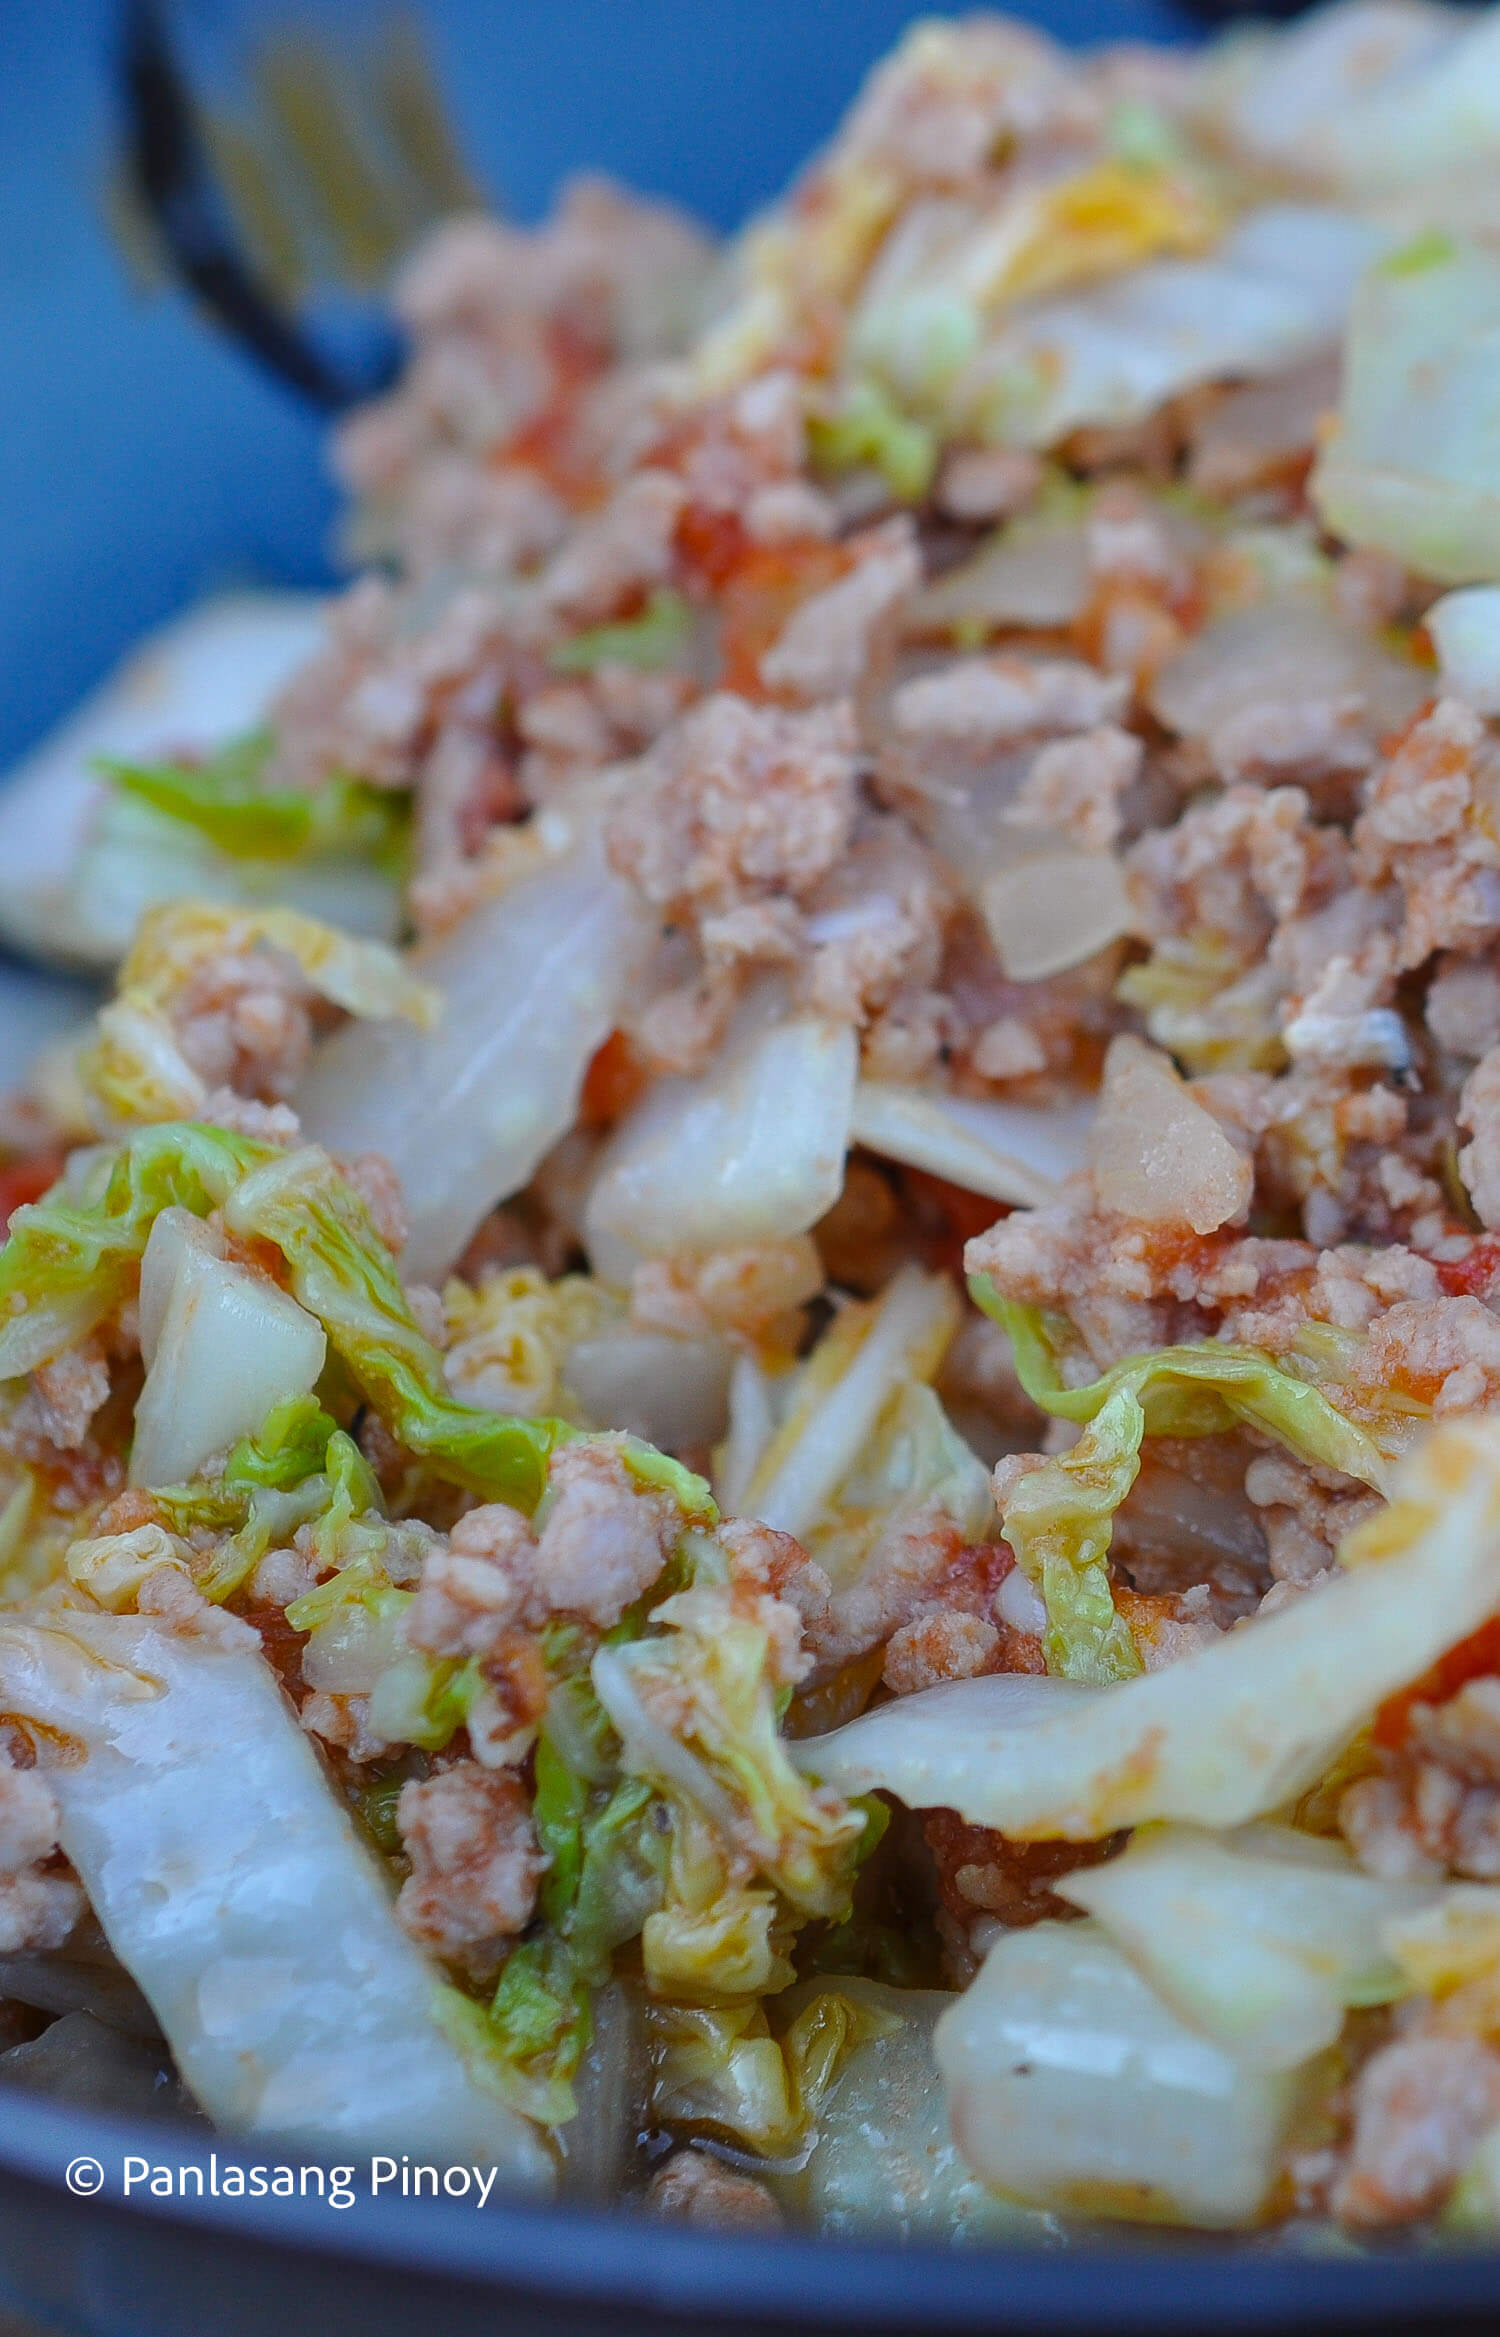 Sauteed Napa Cabbage with Ground Pork (pechay with giniling)